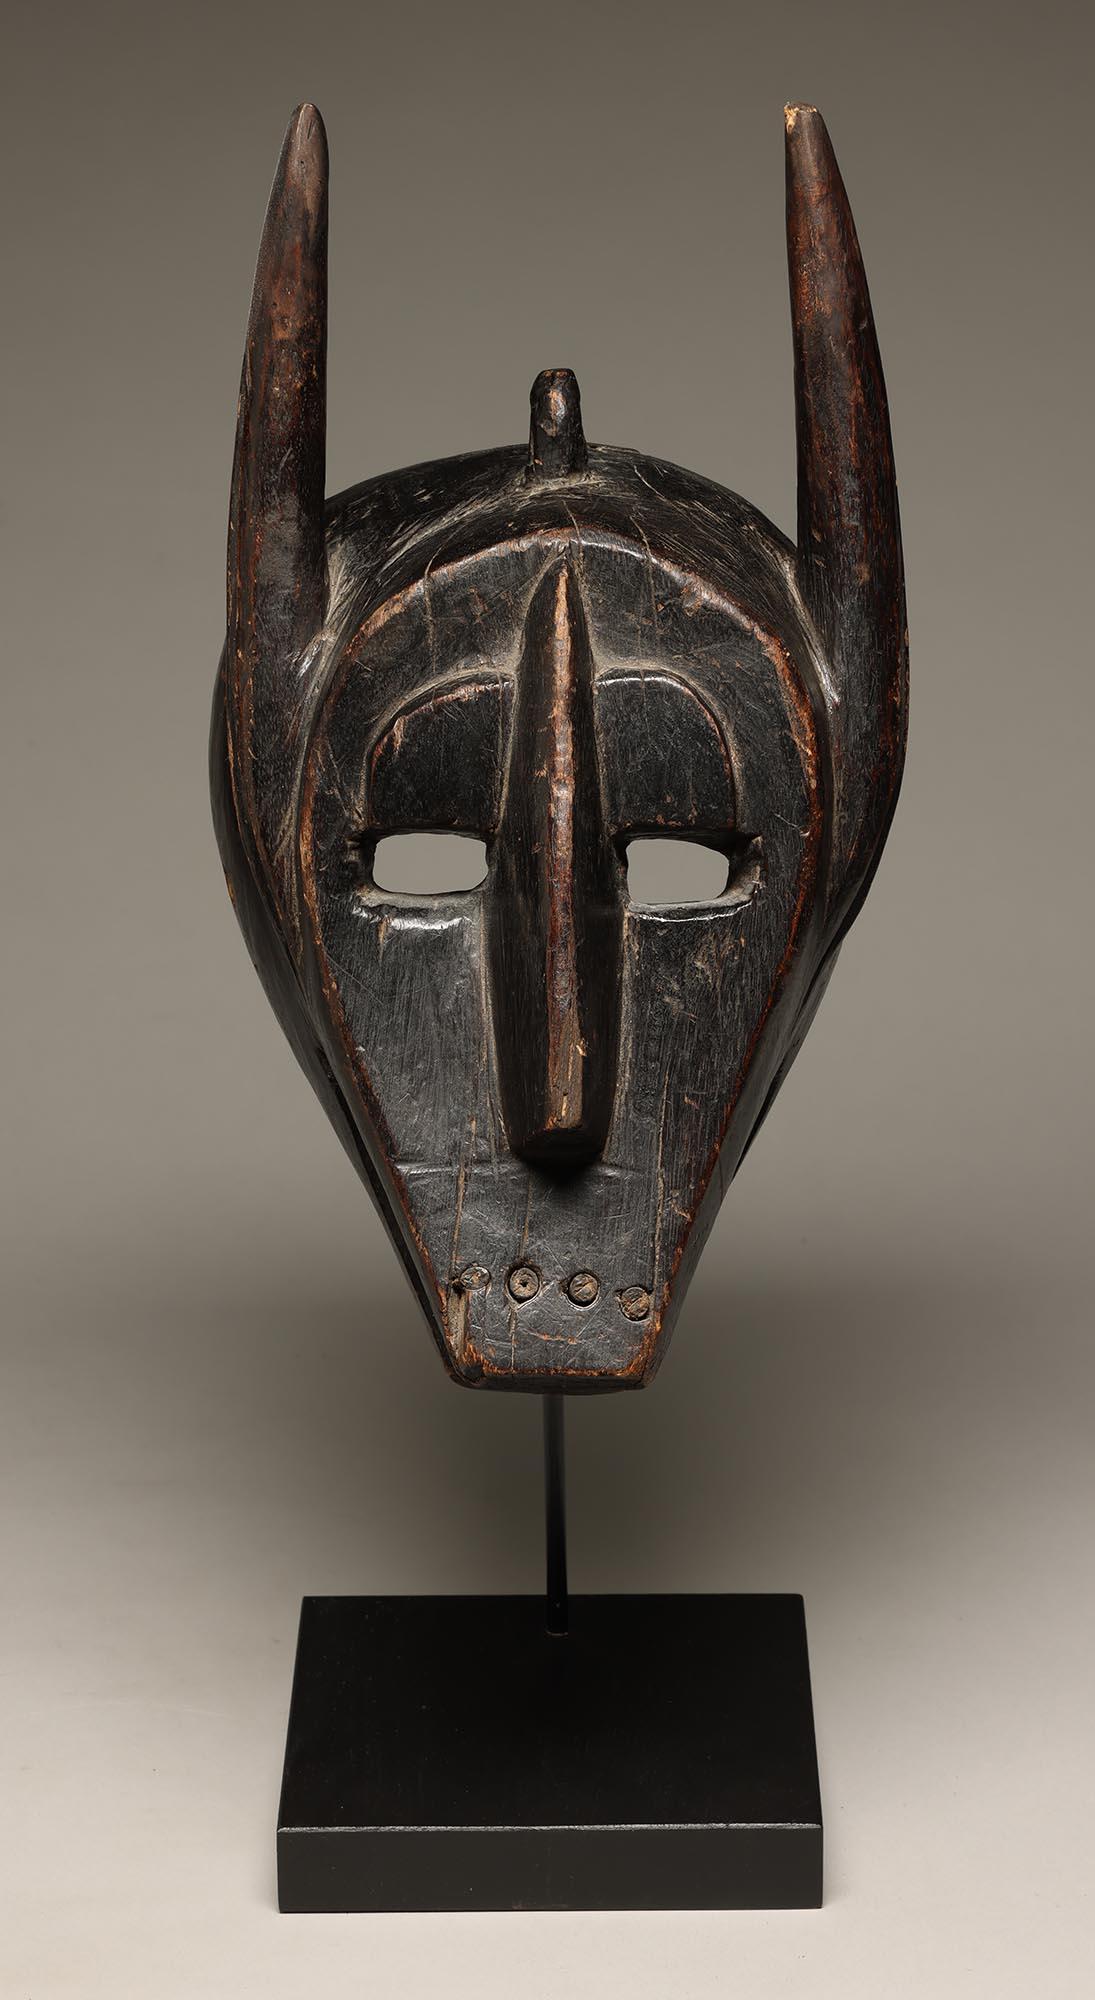 Geometric Barmbara Sukuru Animal Mask with horns, teeth, Mali, West Africa.  Inserted wood teeth, abstract face with open eyes, raised eyebrows and framed face.  Old native repair with iron strip on top of mask.
Mask is 13 3/4